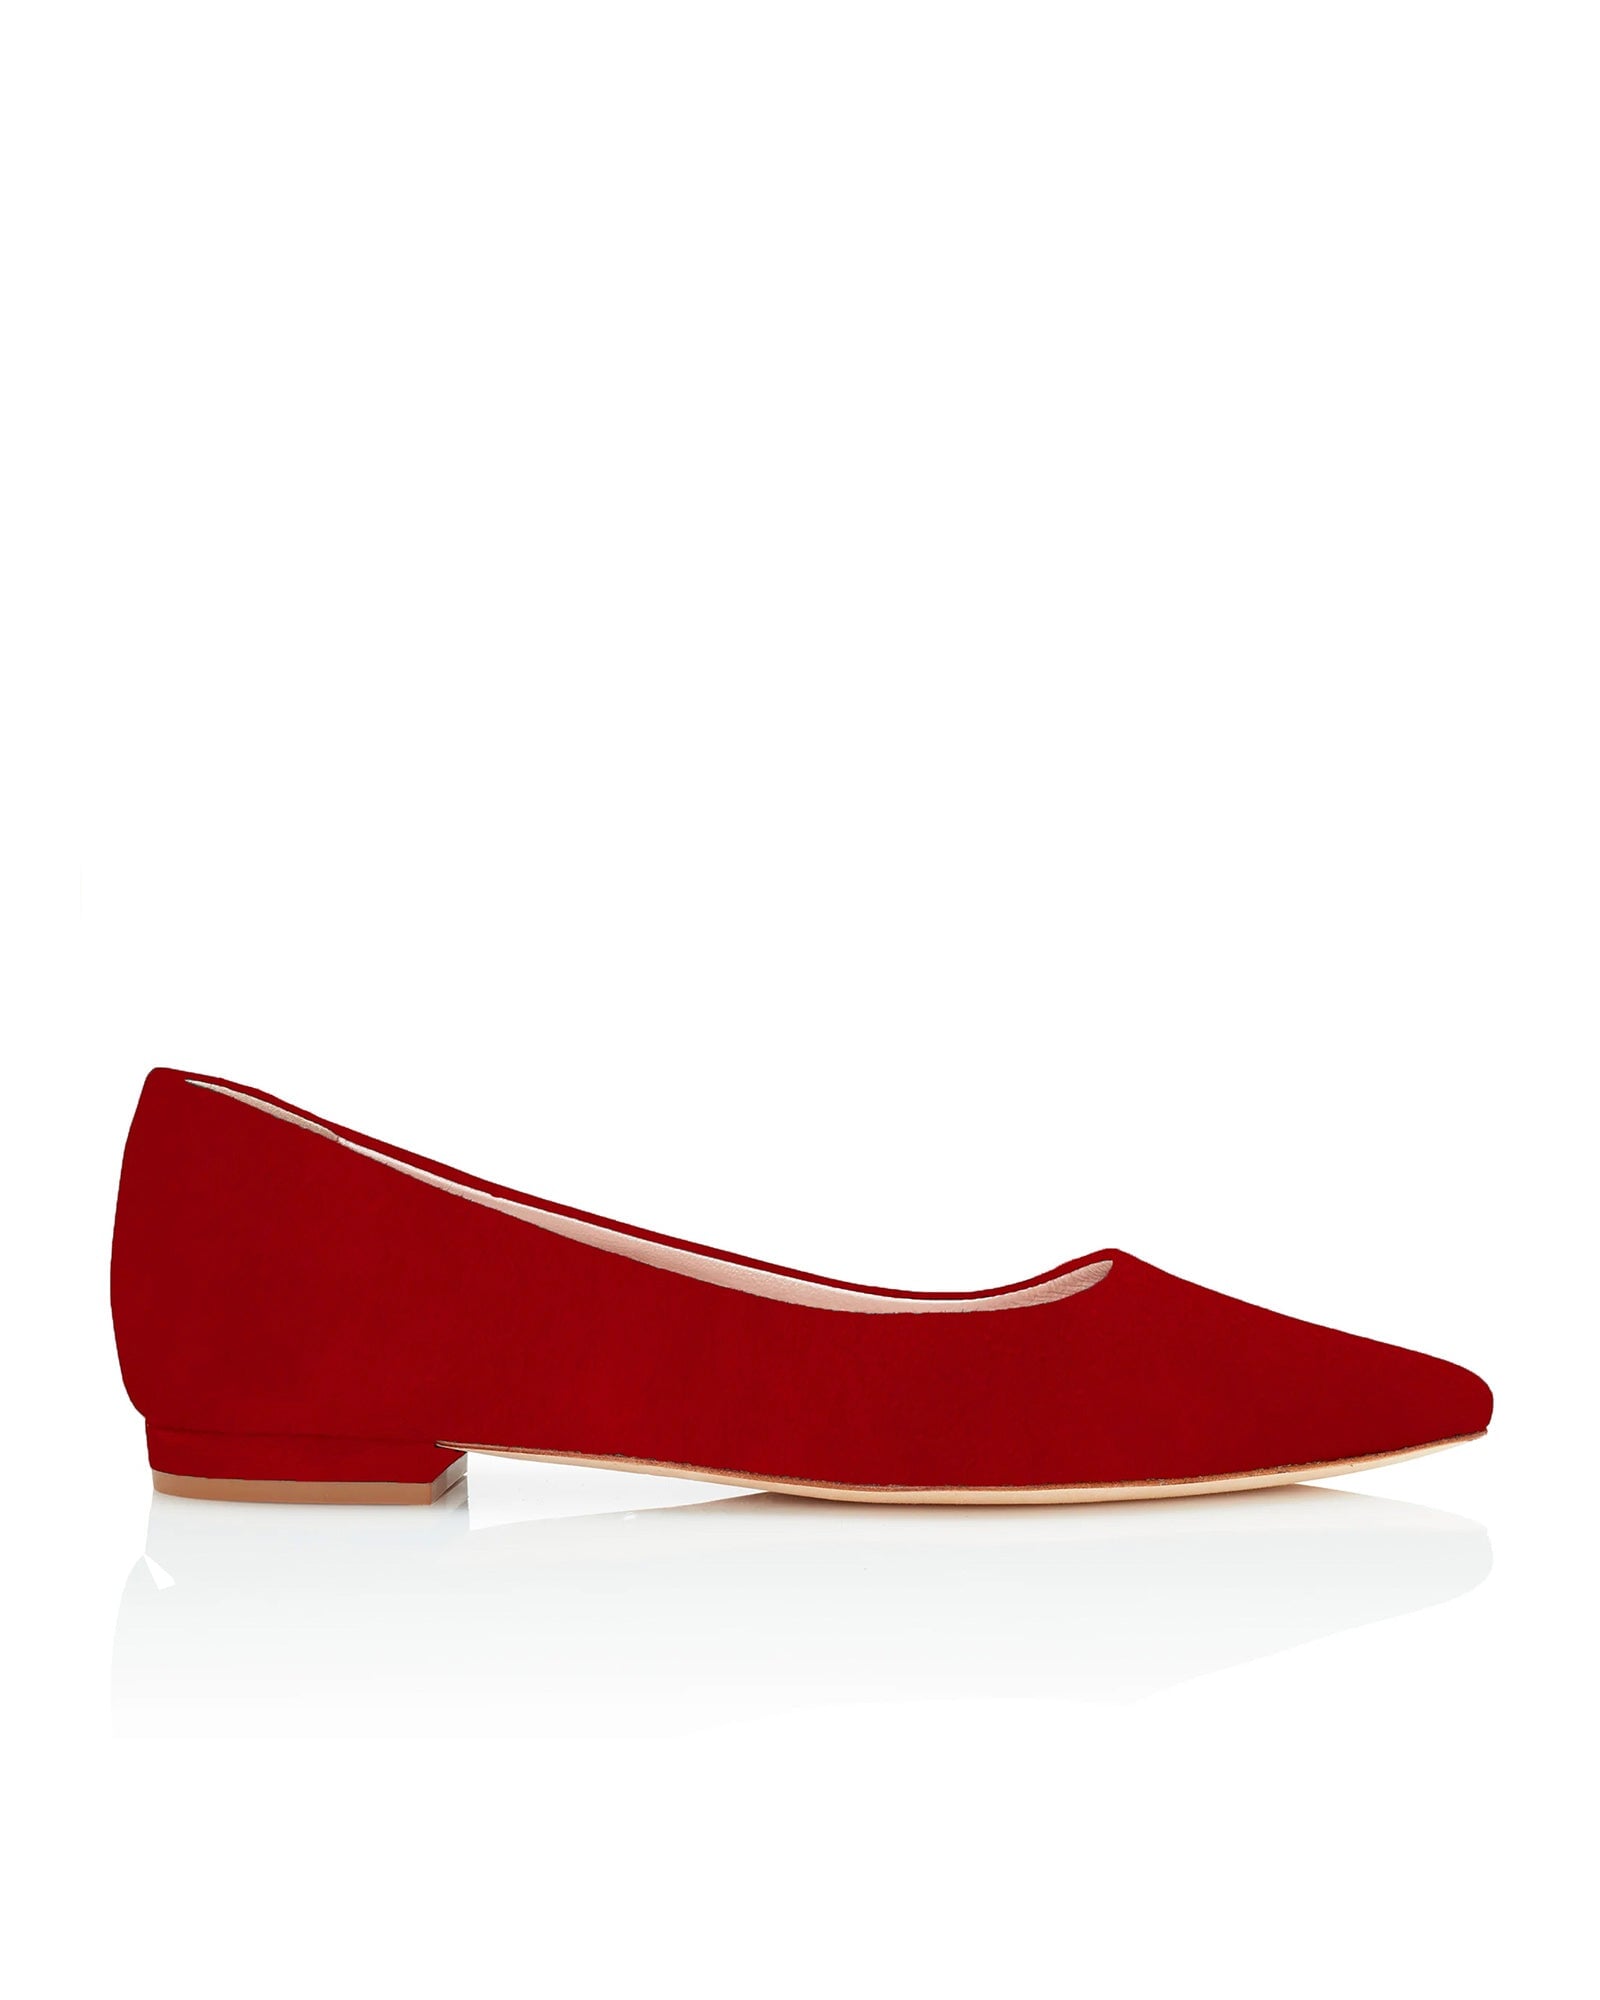 Lulu Candy Fashion Shoe Bright Red Pointed Bridal Flat  image